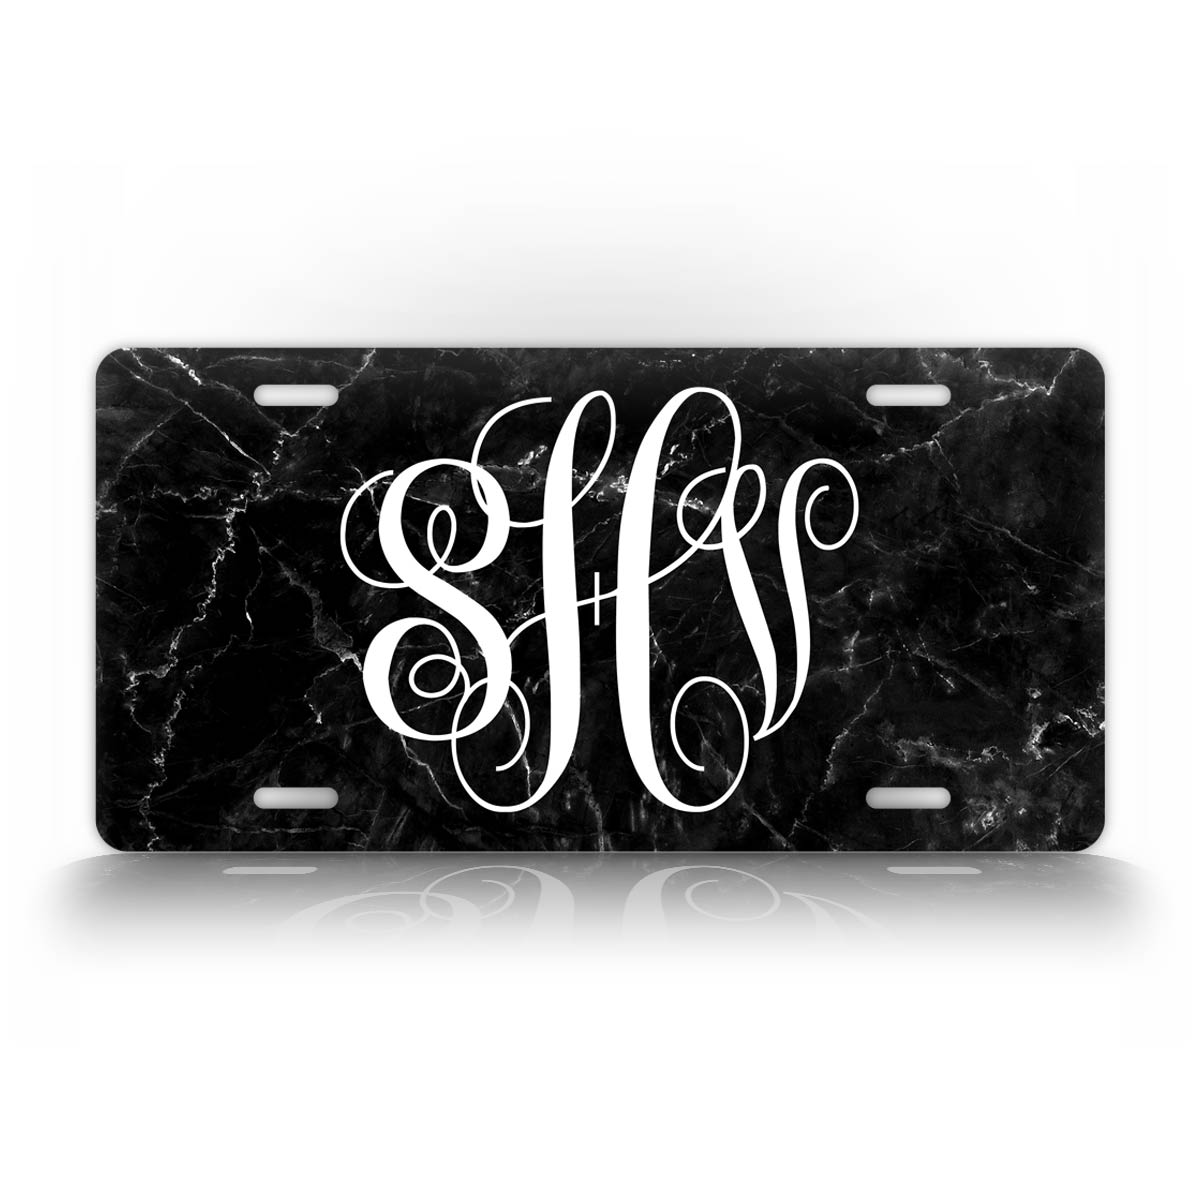 Customized Any Text Black Marble Monogram License Plate 